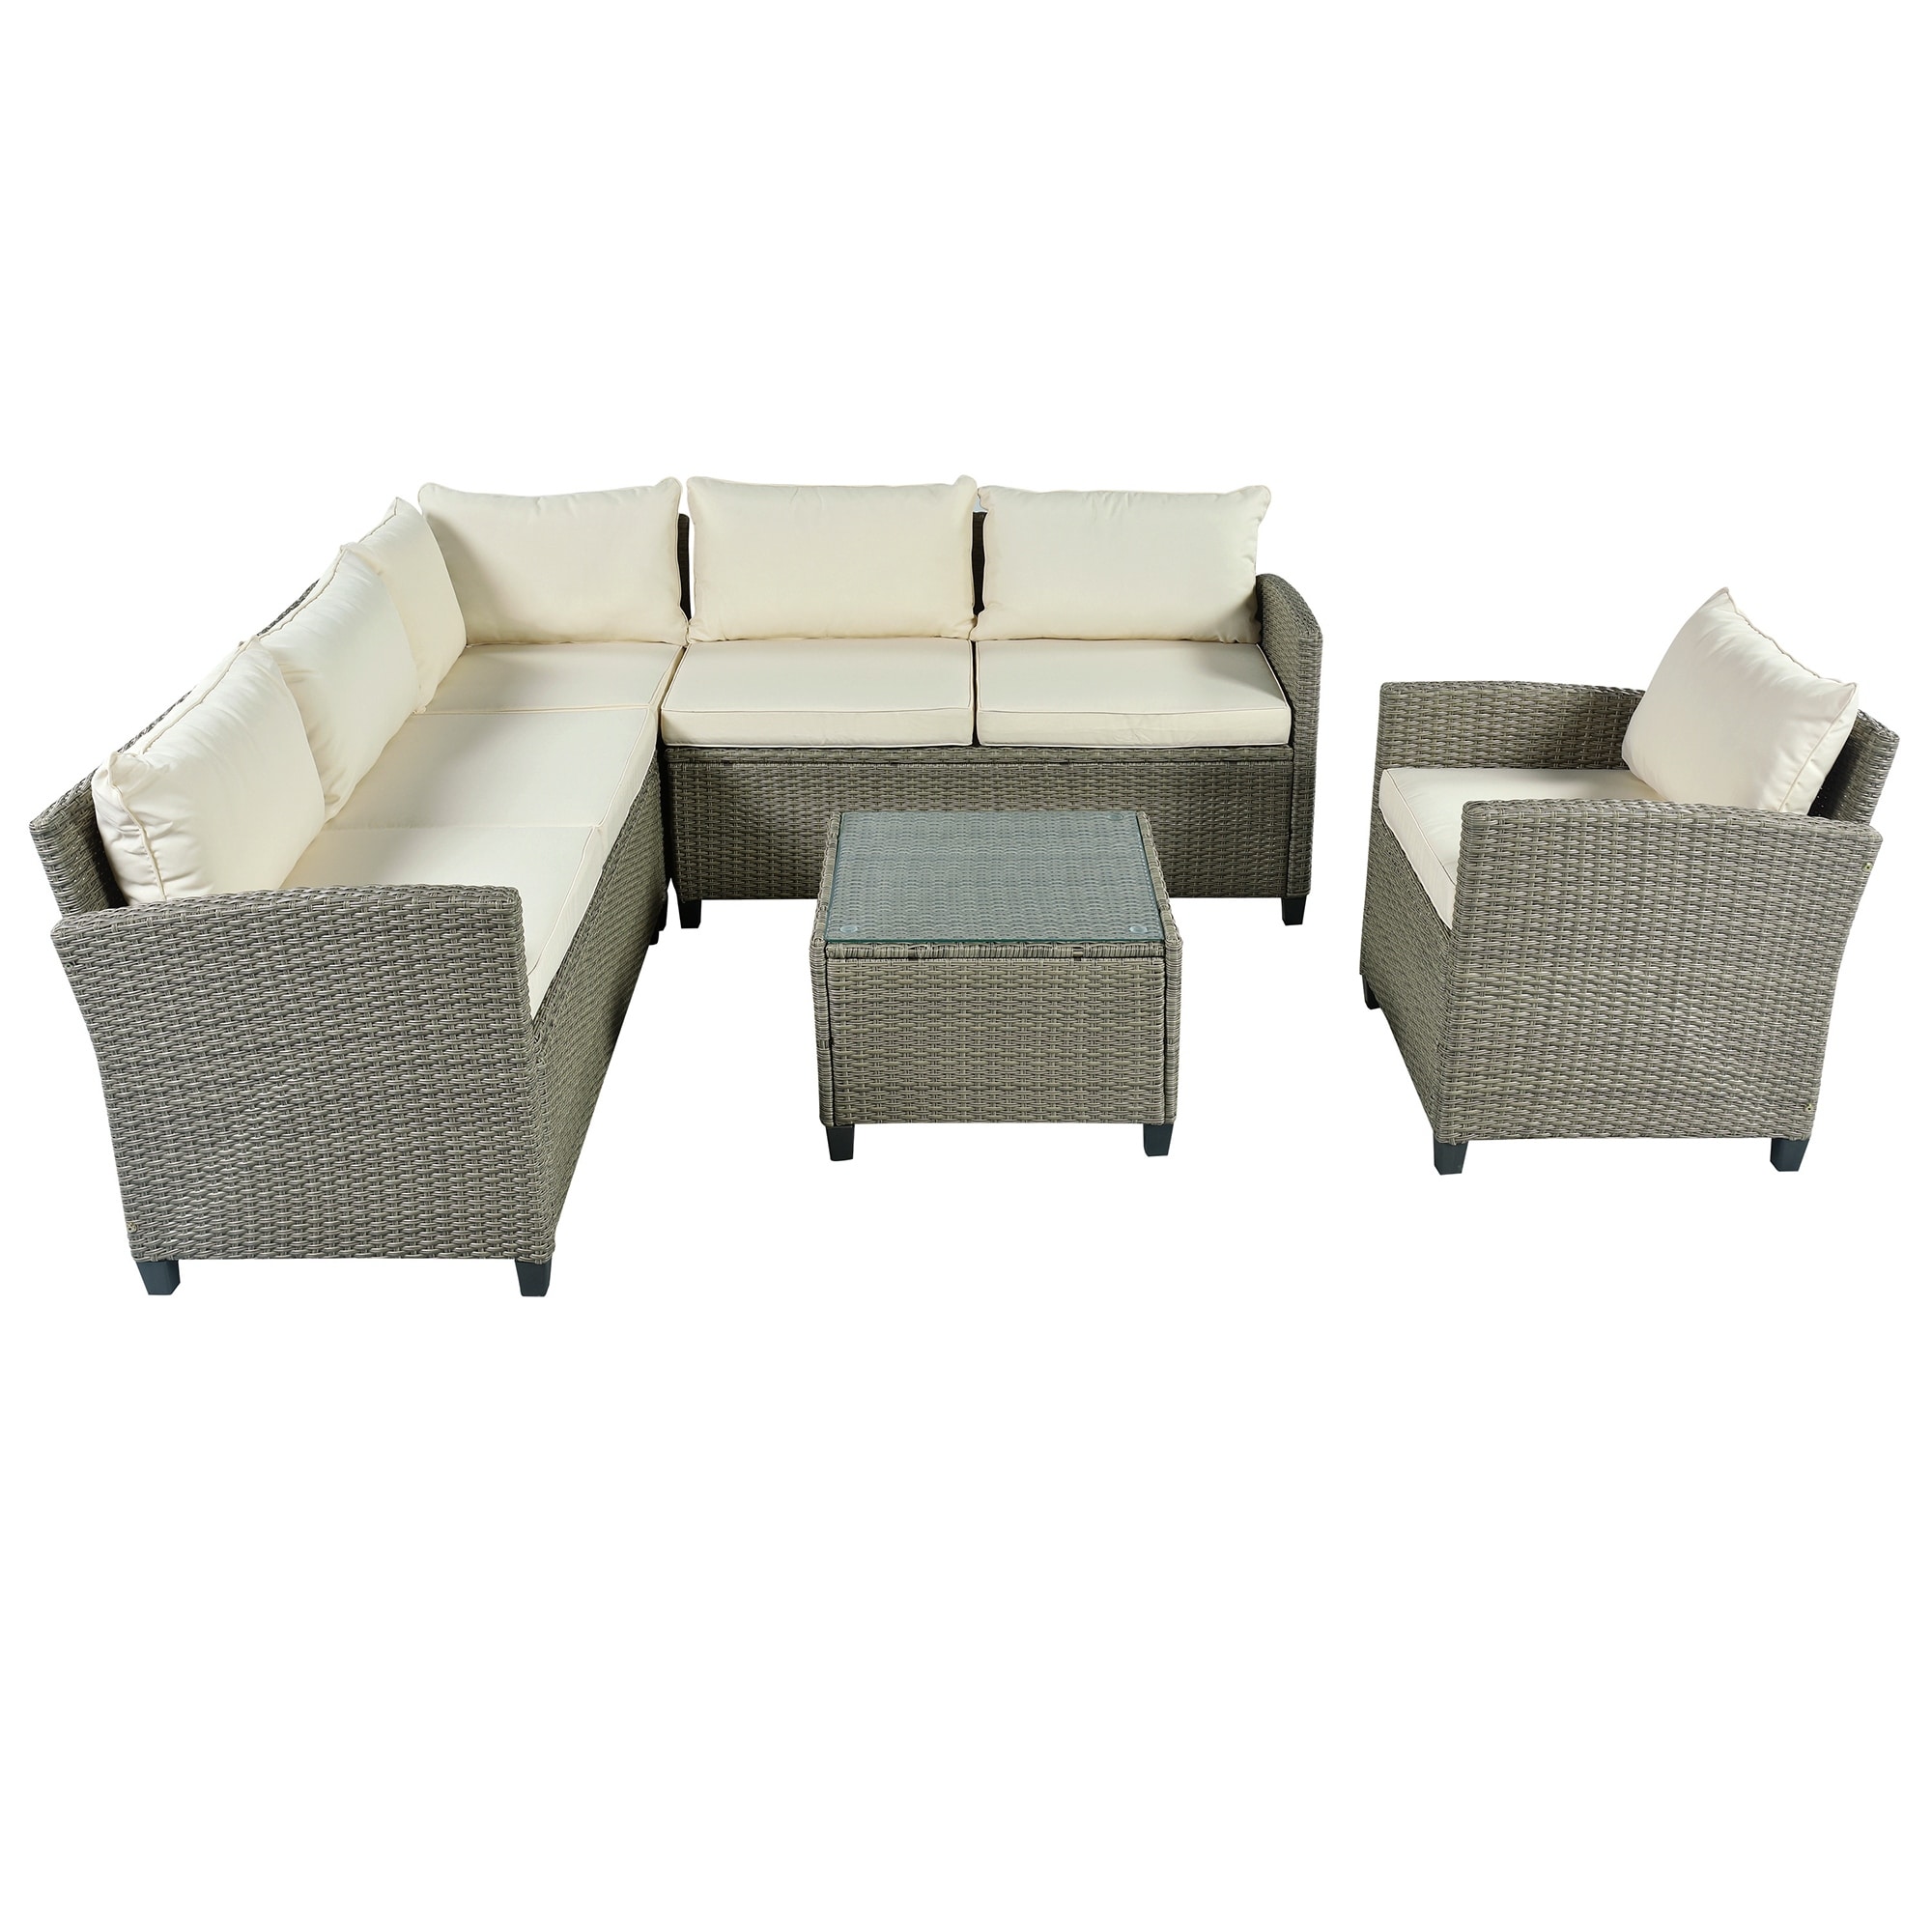 Patio Furniture Set  5 Piece Outdoor Conversation Set，with Coffee Table  Cushions And Single Chair